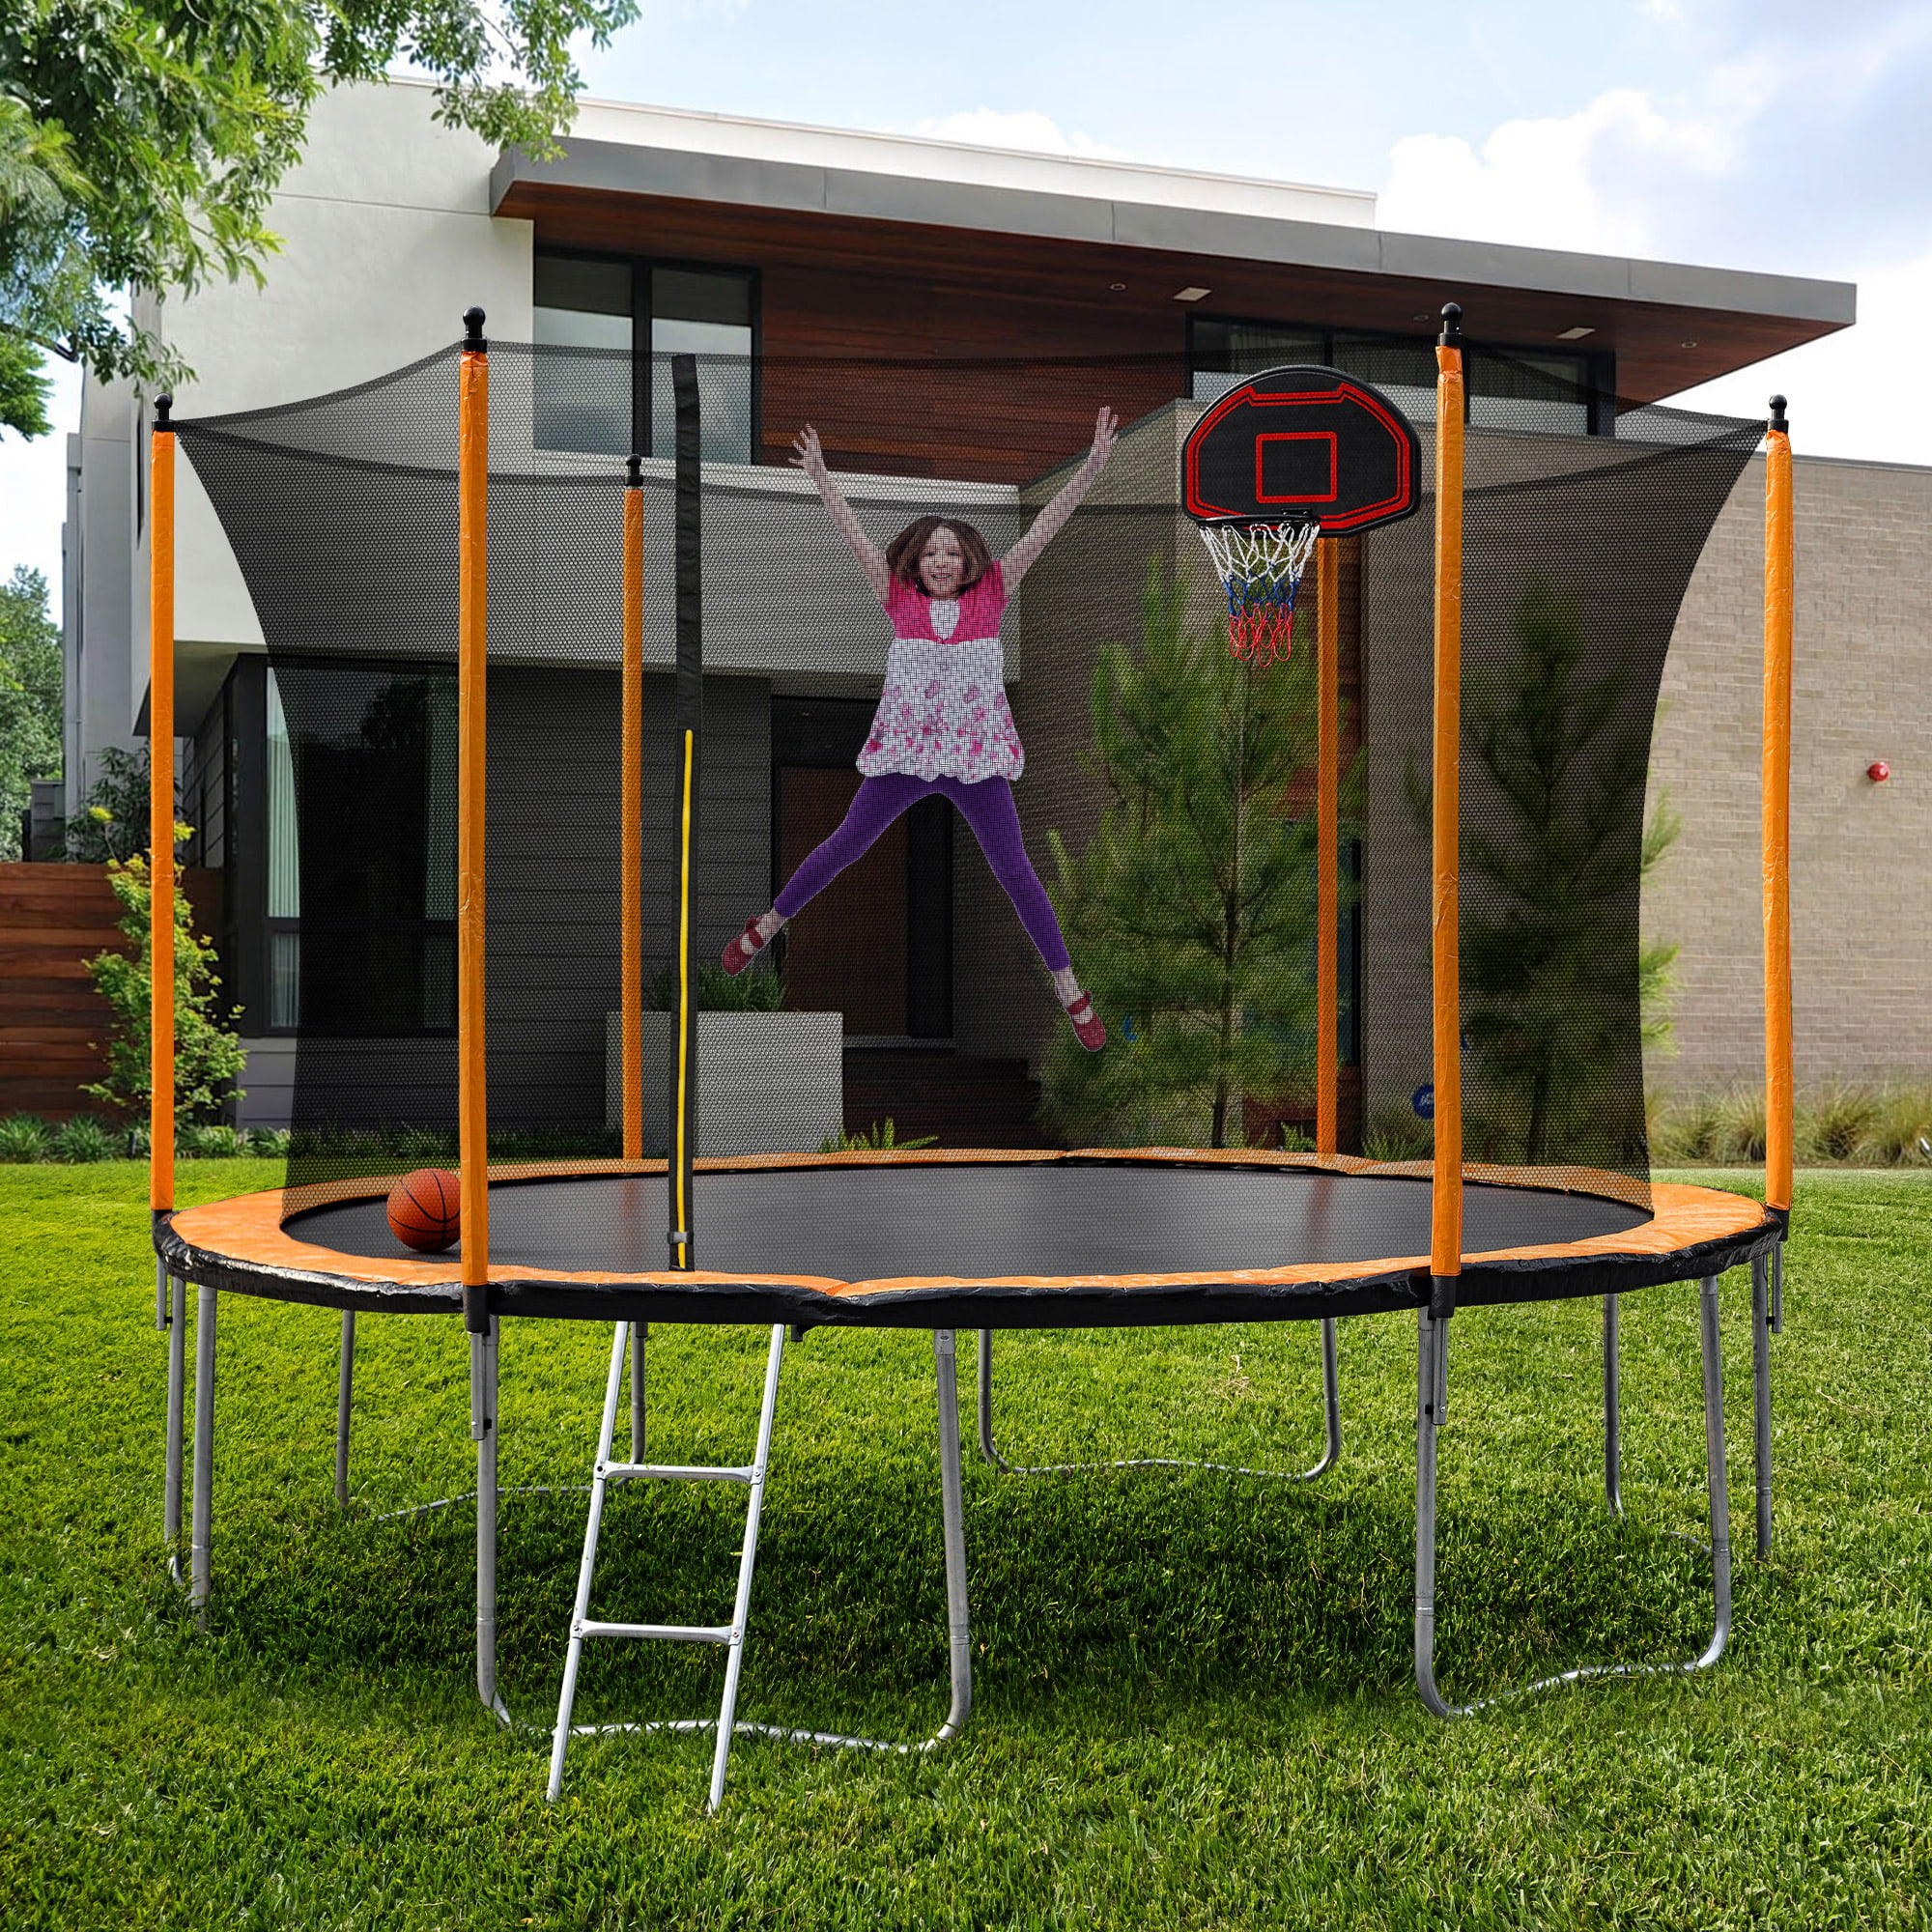 5FT Trampoline Jump Recreational Trampolines with Enclosure Net Heavy Duty Jumping Mat and Spring Cover Padding Combo Bounce Outdoor Trampoline for Kids Teens and Adults 